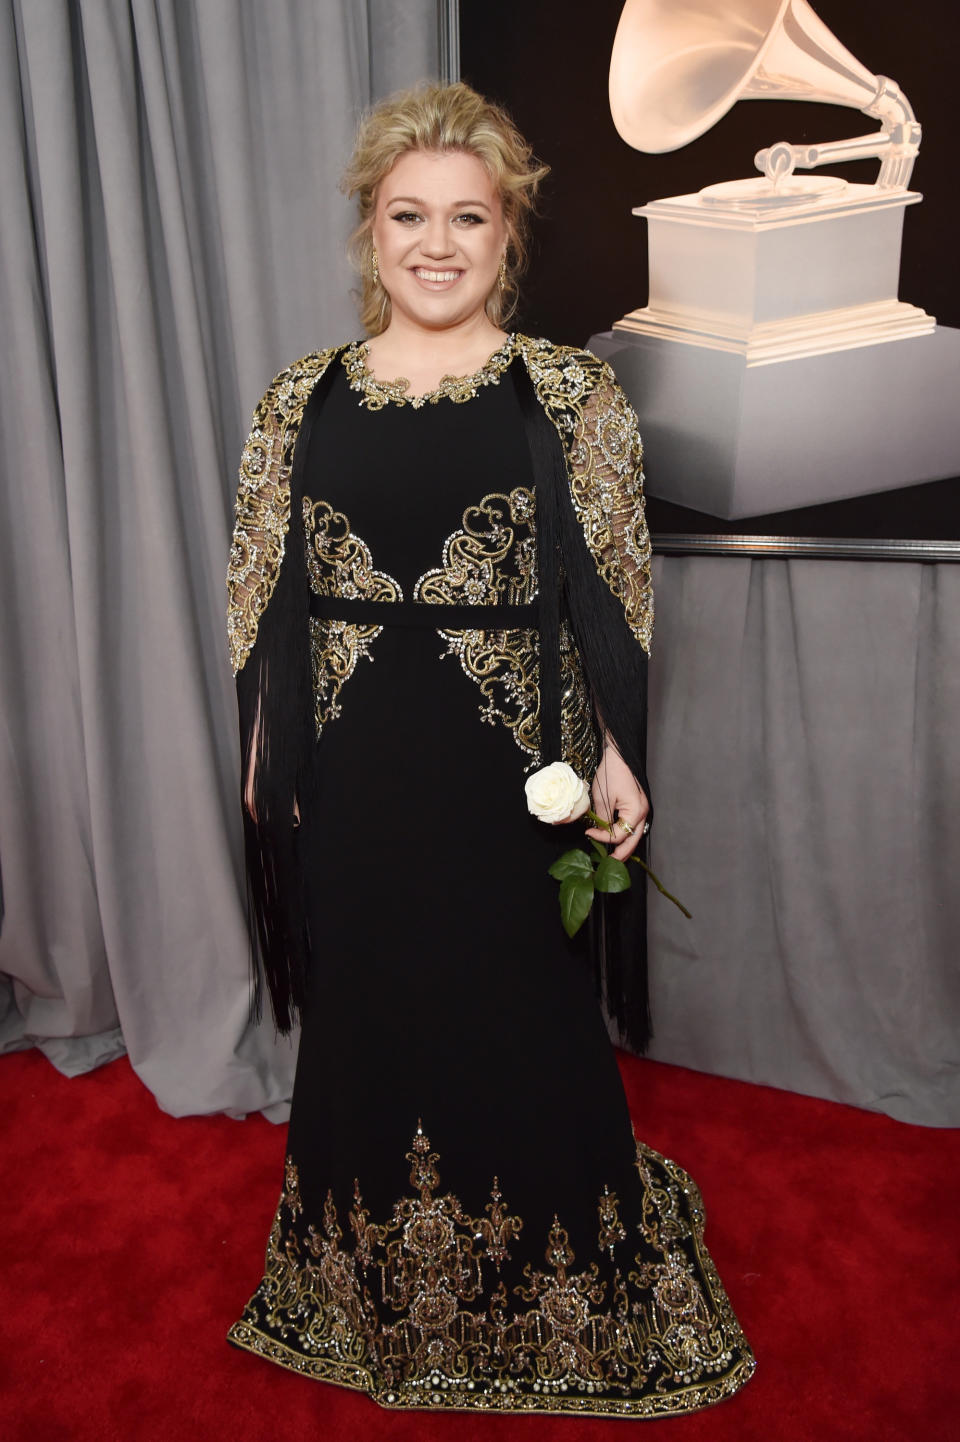 Kelly Clarkson carrying her white rose at the 60th annual Grammy Awards on Jan. 28.&nbsp; (Photo: Kevin Mazur via Getty Images)